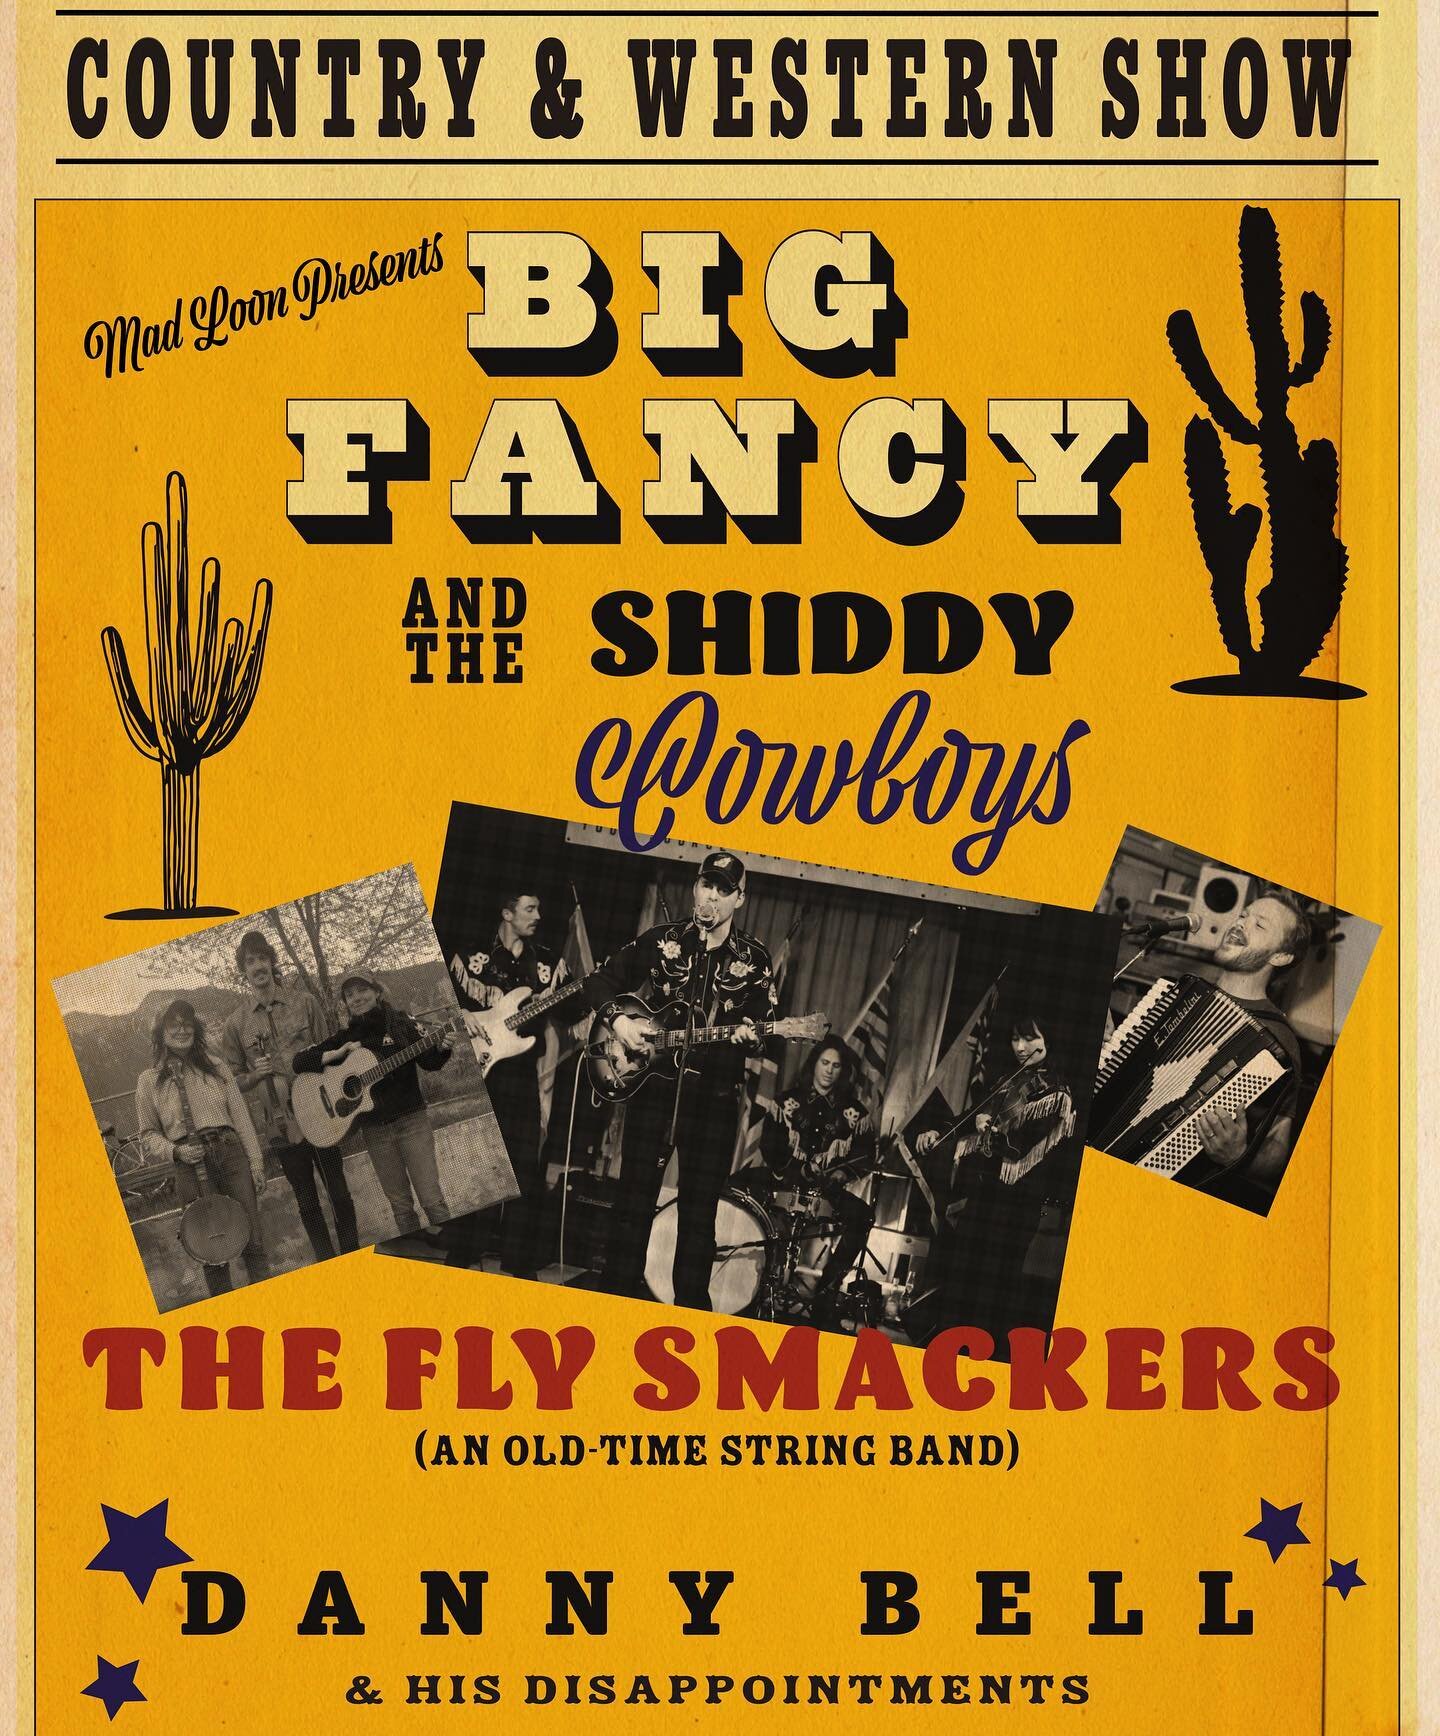 @bigfancycountry coming to the @legion43pg  along with @the.fly.smackers  and @dannybellmusic !  May 28th folks!  Tickets available now through link in bio :) 
.
#peegleeg #takeonpg #northernbc #princegeorgemusic #princegeorgebc #madloon